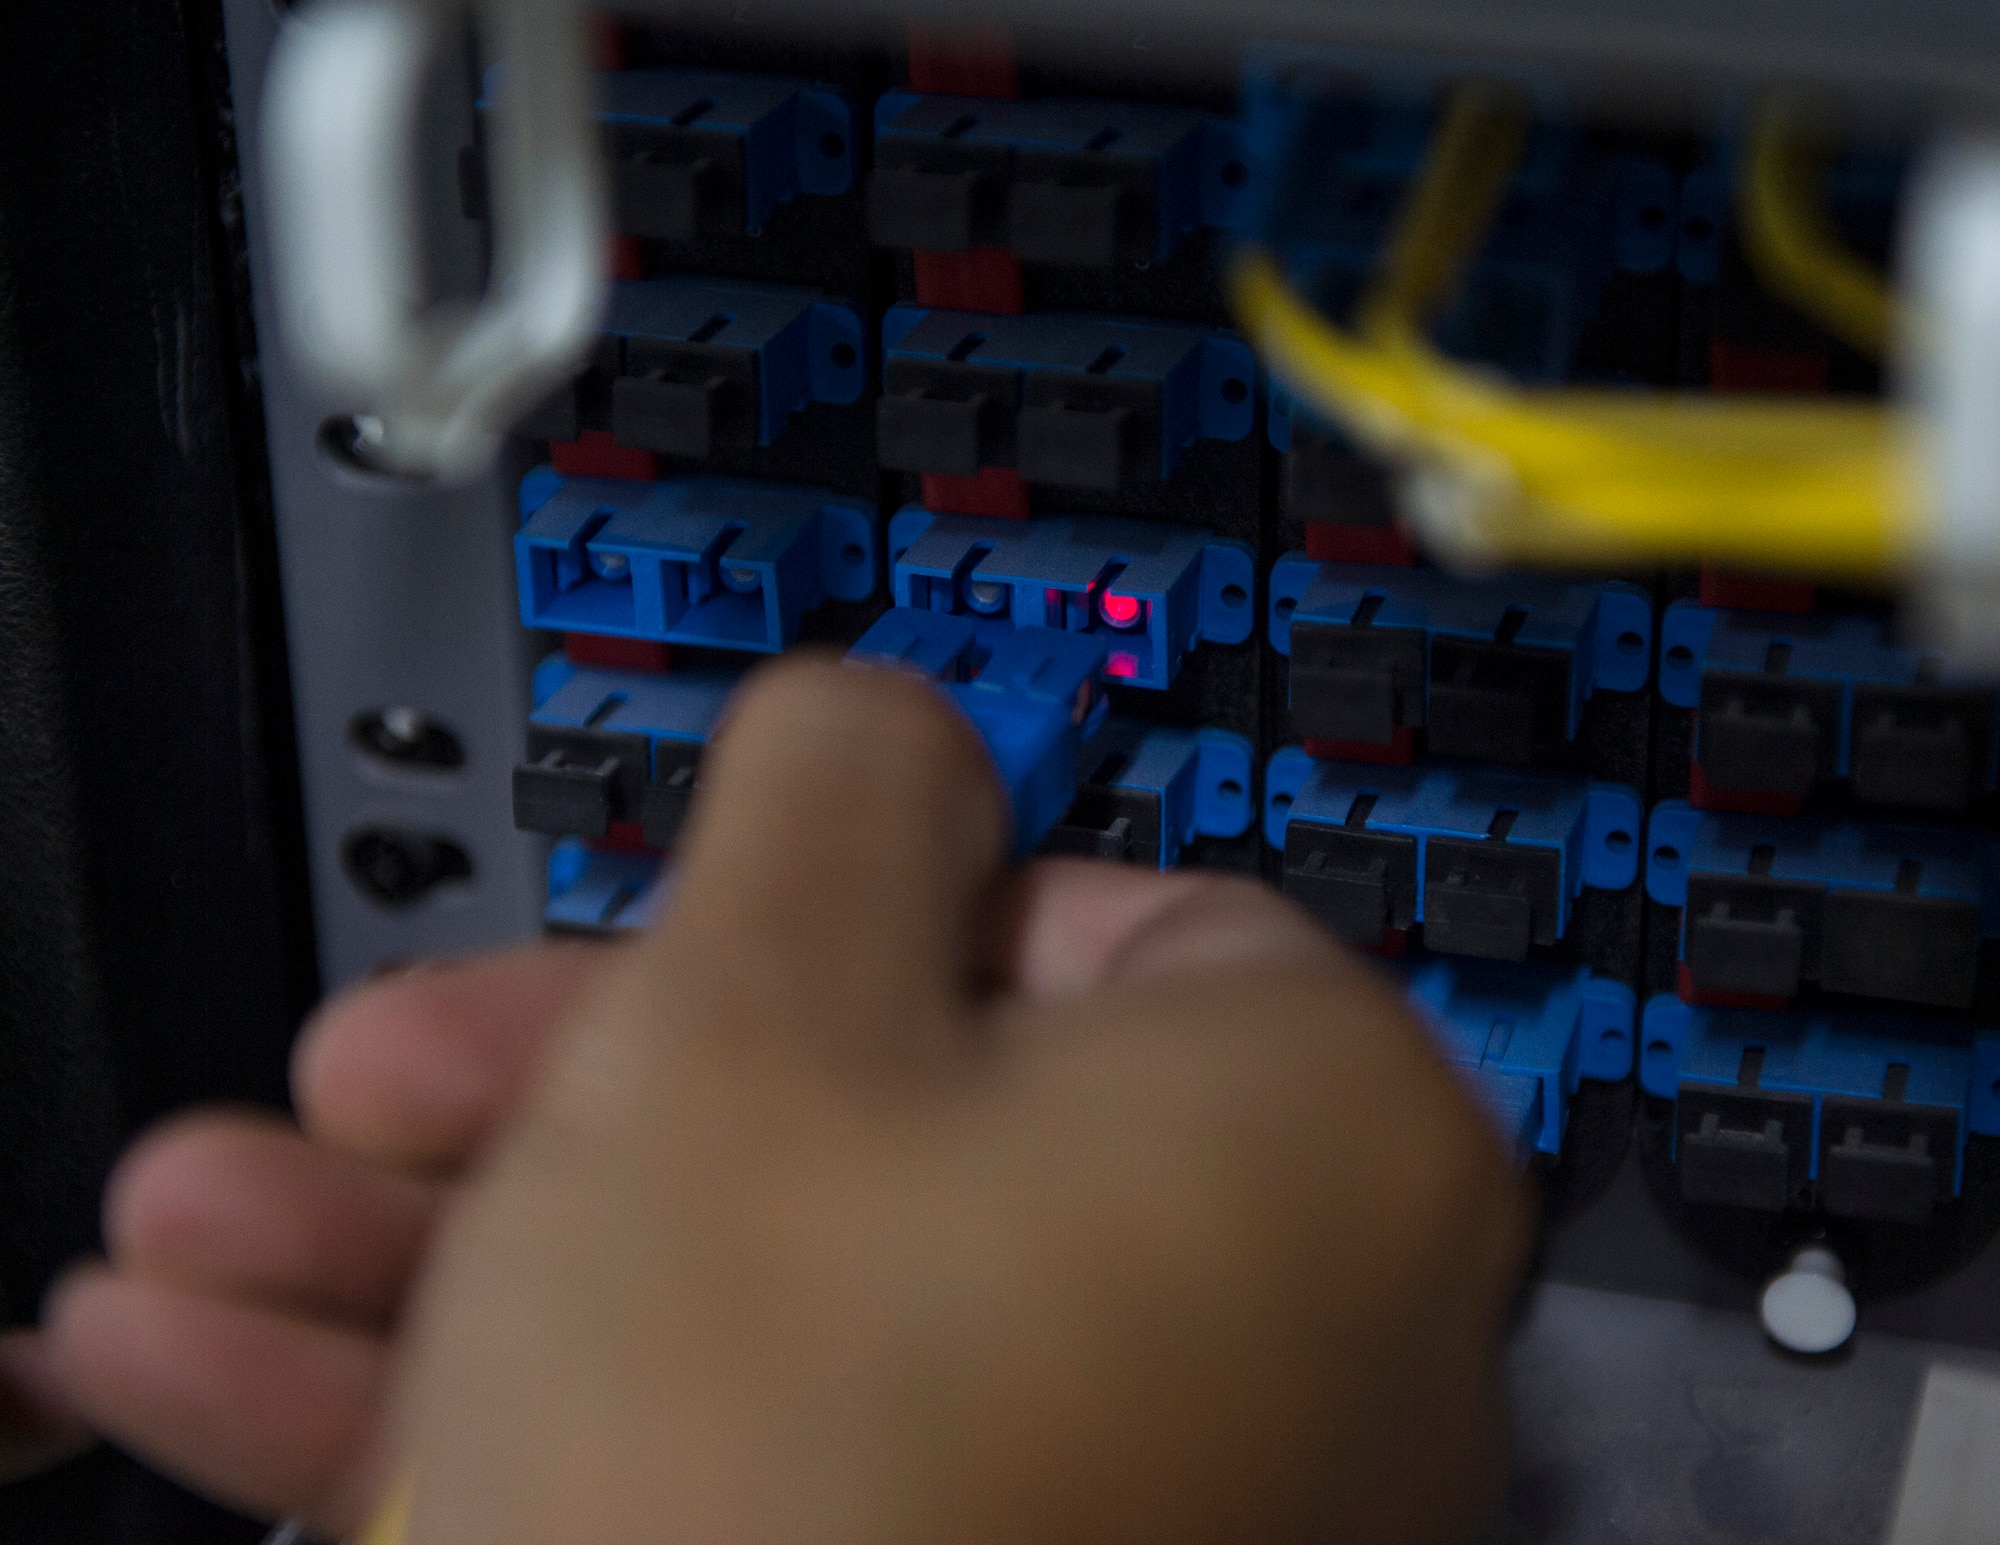 U.S. Air Force Senior Airman Monorom Tim, a network management technician with the 379th Expeditionary Communication Squadron, plugs in a fiber cable at Al Udeid Air Base, Qatar, July 14, 2017.